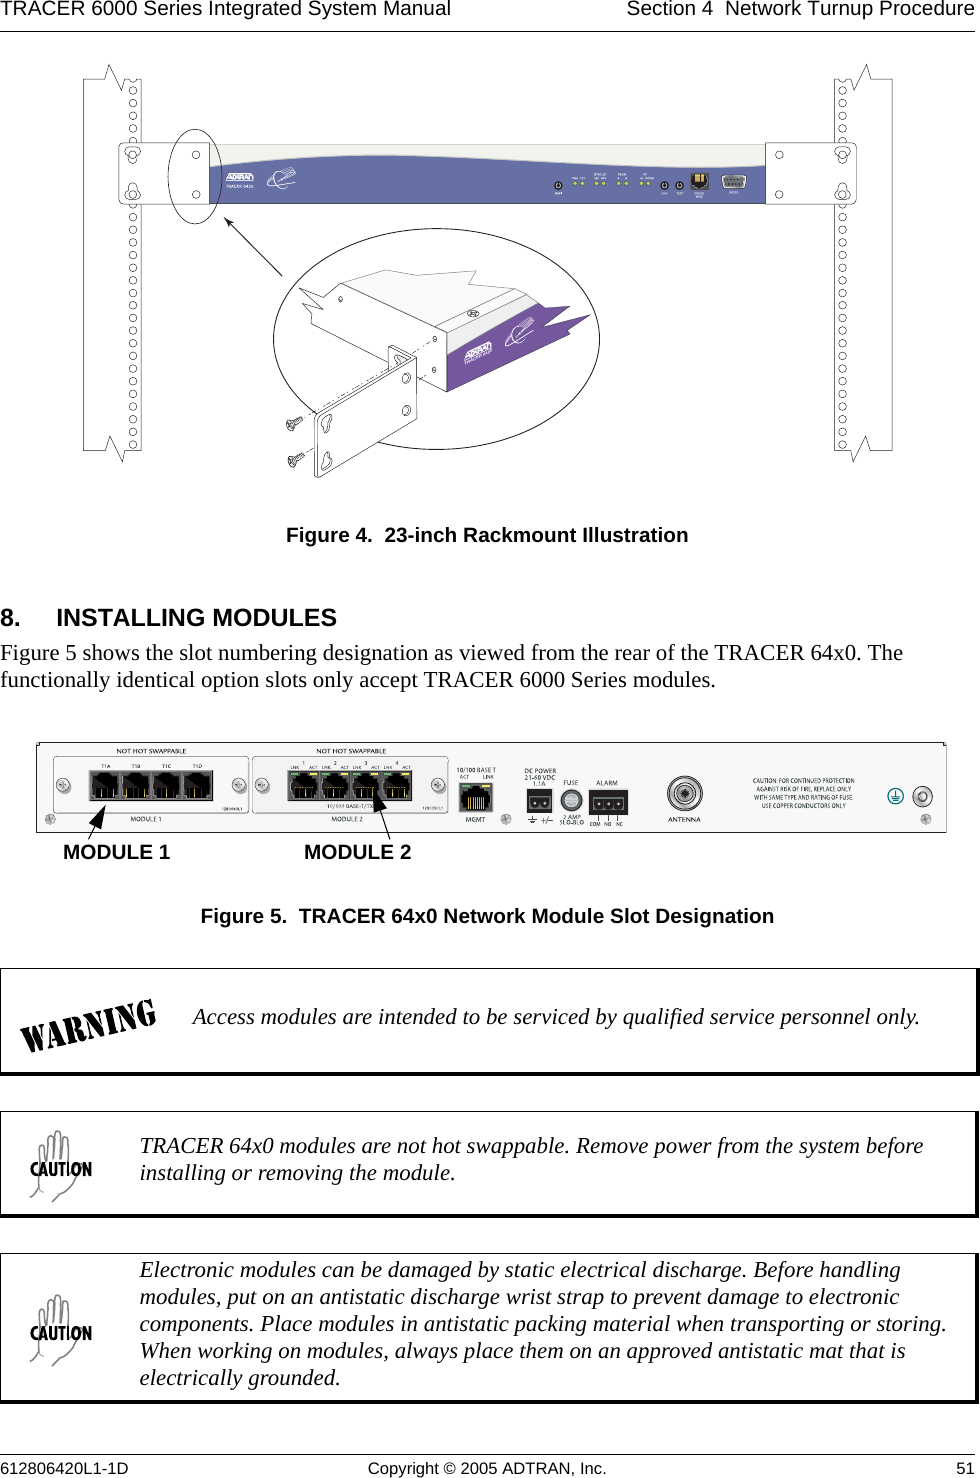 TRACER 6000 Series Integrated System Manual Section 4  Network Turnup Procedure612806420L1-1D Copyright © 2005 ADTRAN, Inc. 51Figure 4.  23-inch Rackmount Illustration8. INSTALLING MODULESFigure 5 shows the slot numbering designation as viewed from the rear of the TRACER 64x0. The functionally identical option slots only accept TRACER 6000 Series modules. Figure 5.  TRACER 64x0 Network Module Slot DesignationAccess modules are intended to be serviced by qualified service personnel only.TRACER 64x0 modules are not hot swappable. Remove power from the system before installing or removing the module.Electronic modules can be damaged by static electrical discharge. Before handling modules, put on an antistatic discharge wrist strap to prevent damage to electronic components. Place modules in antistatic packing material when transporting or storing. When working on modules, always place them on an approved antistatic mat that is electrically grounded. TRACER 6420MODULE 1 MODULE 2